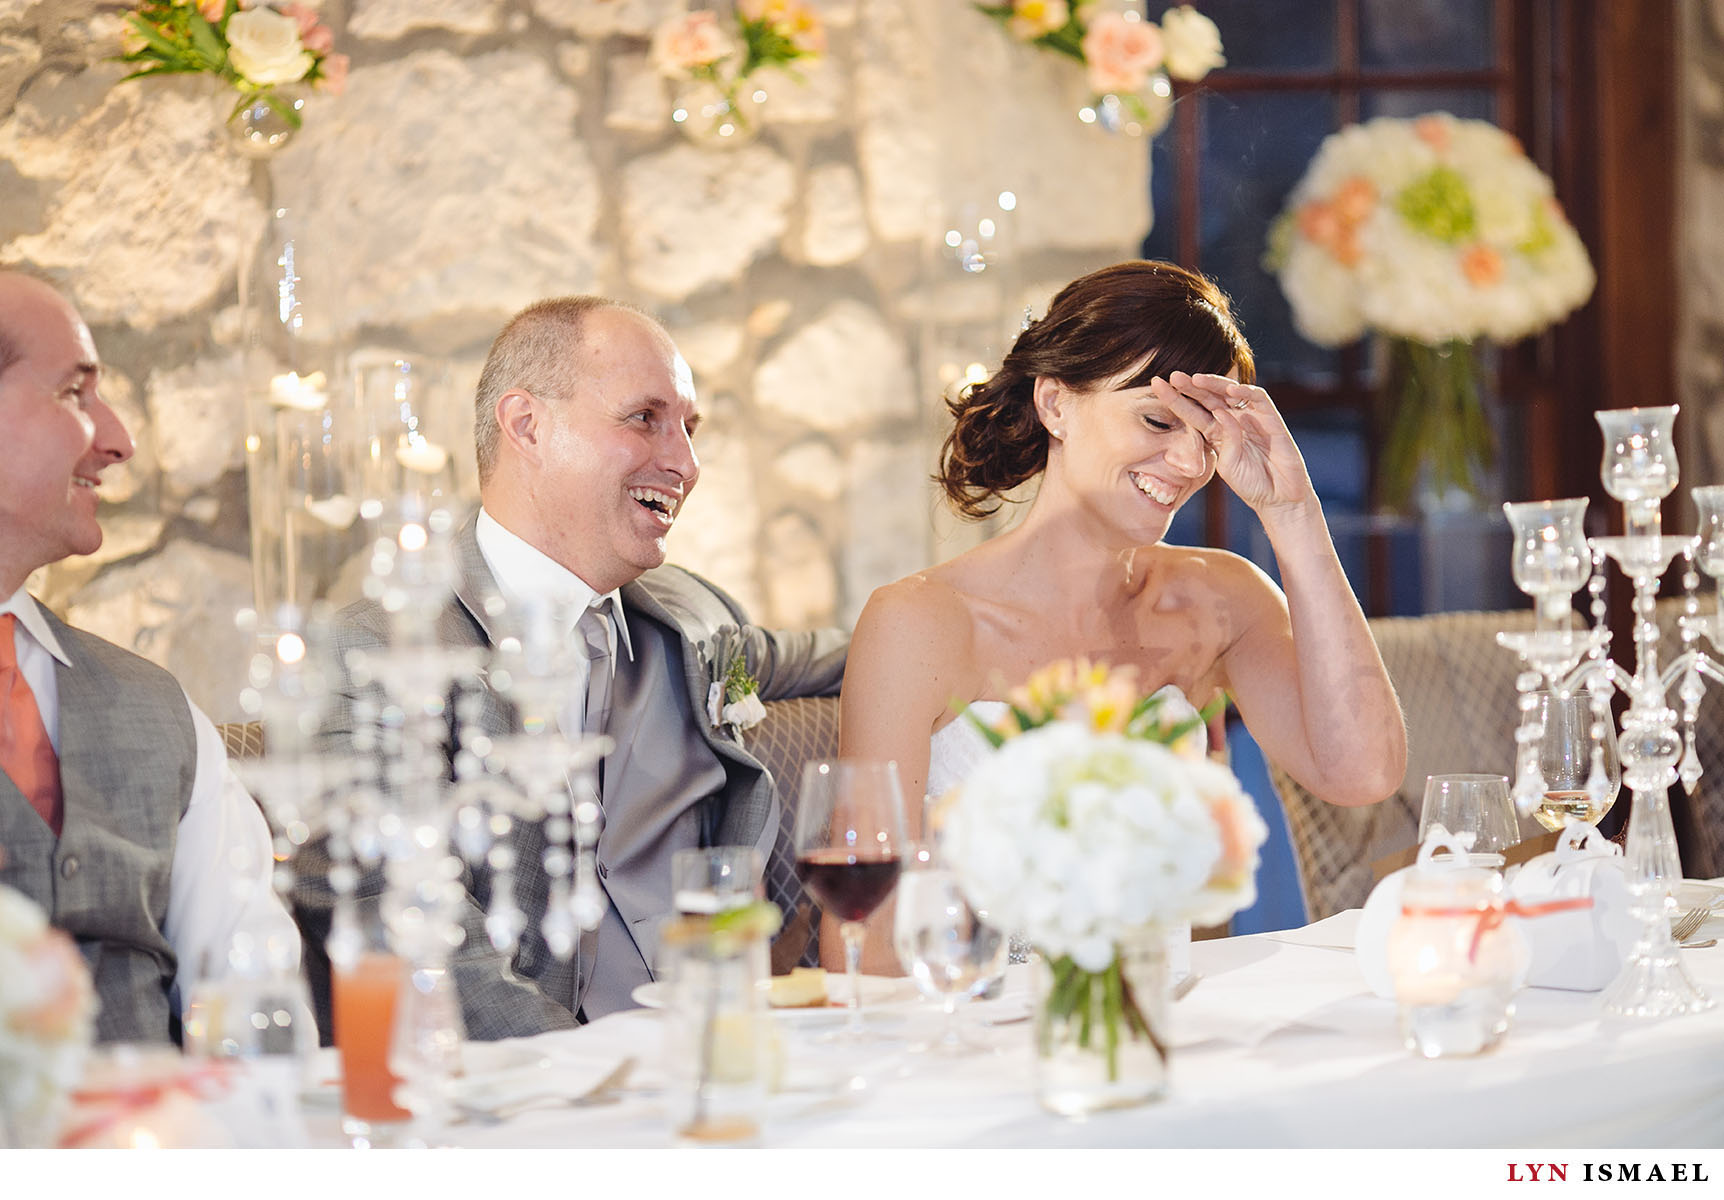 The bride reacted with laughter at a speech.